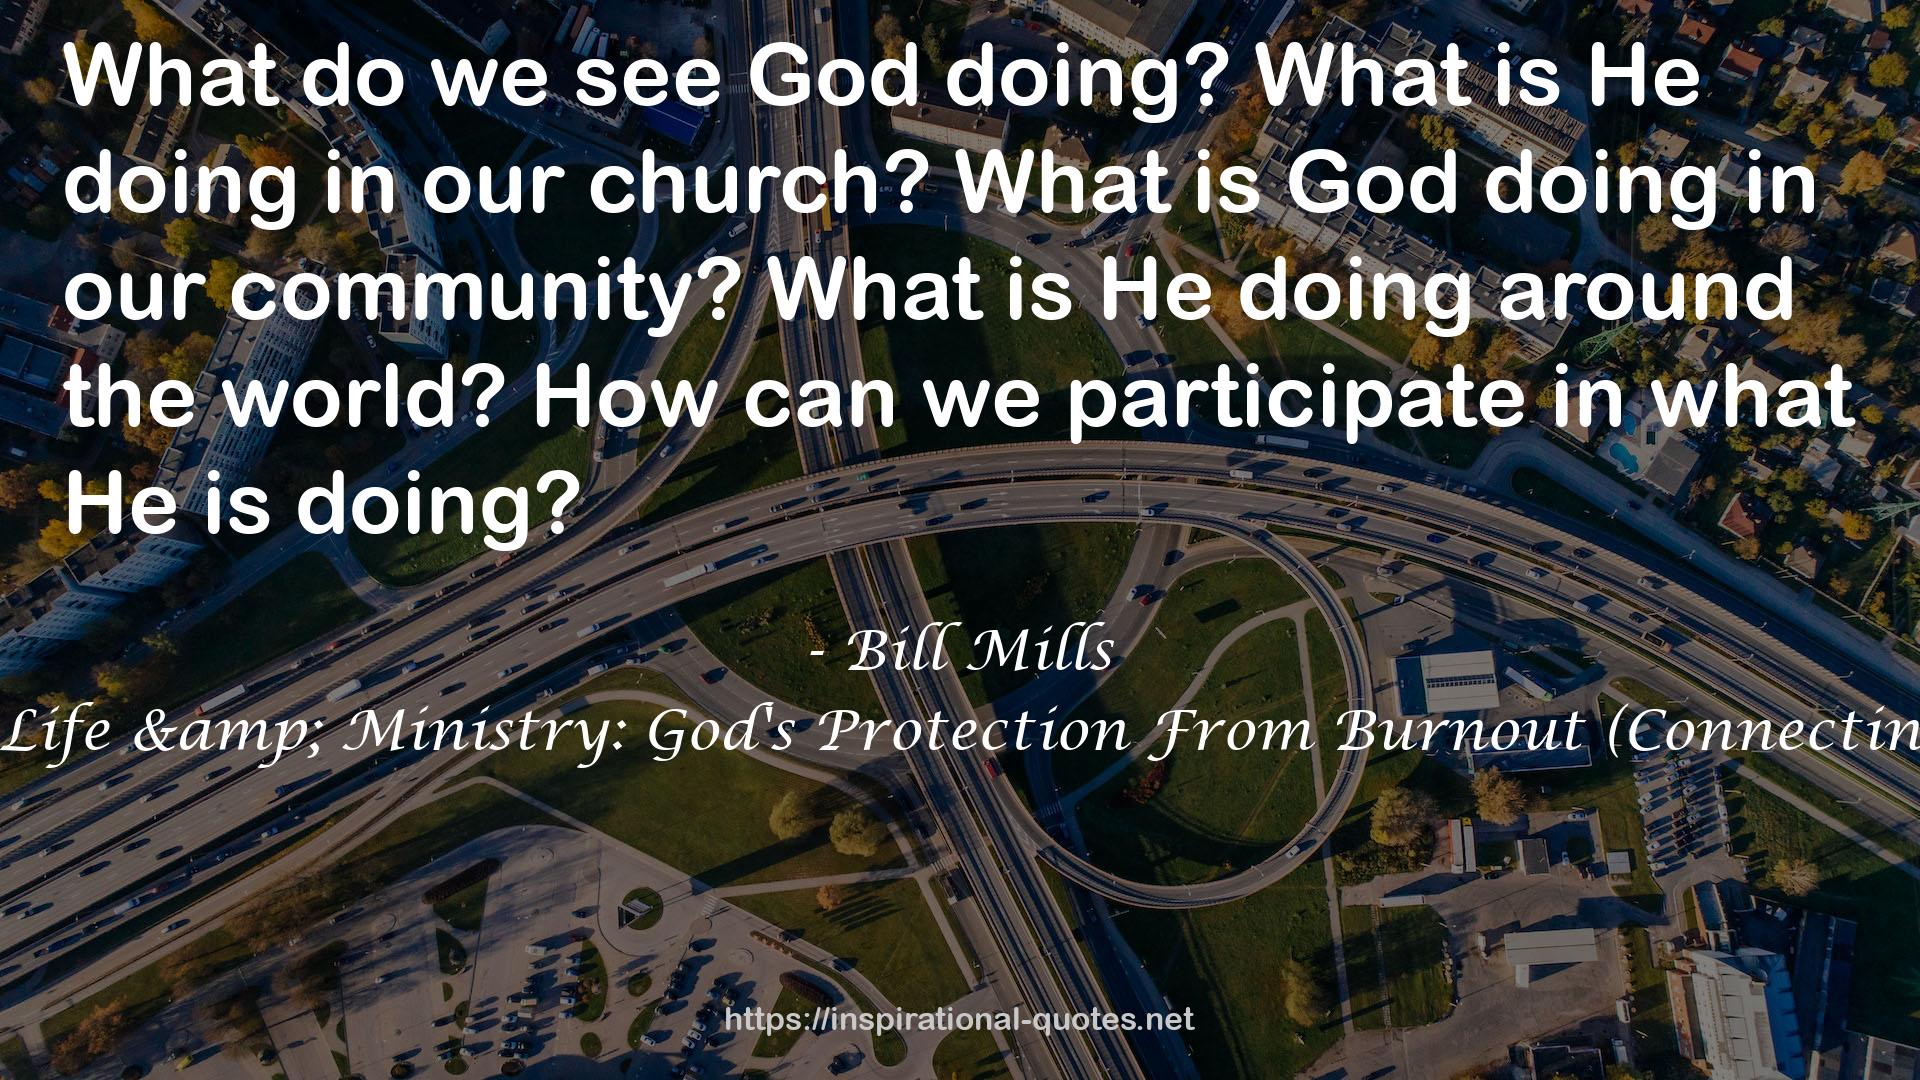 Finishing Well In Life & Ministry: God's Protection From Burnout (Connecting with Ministries) QUOTES